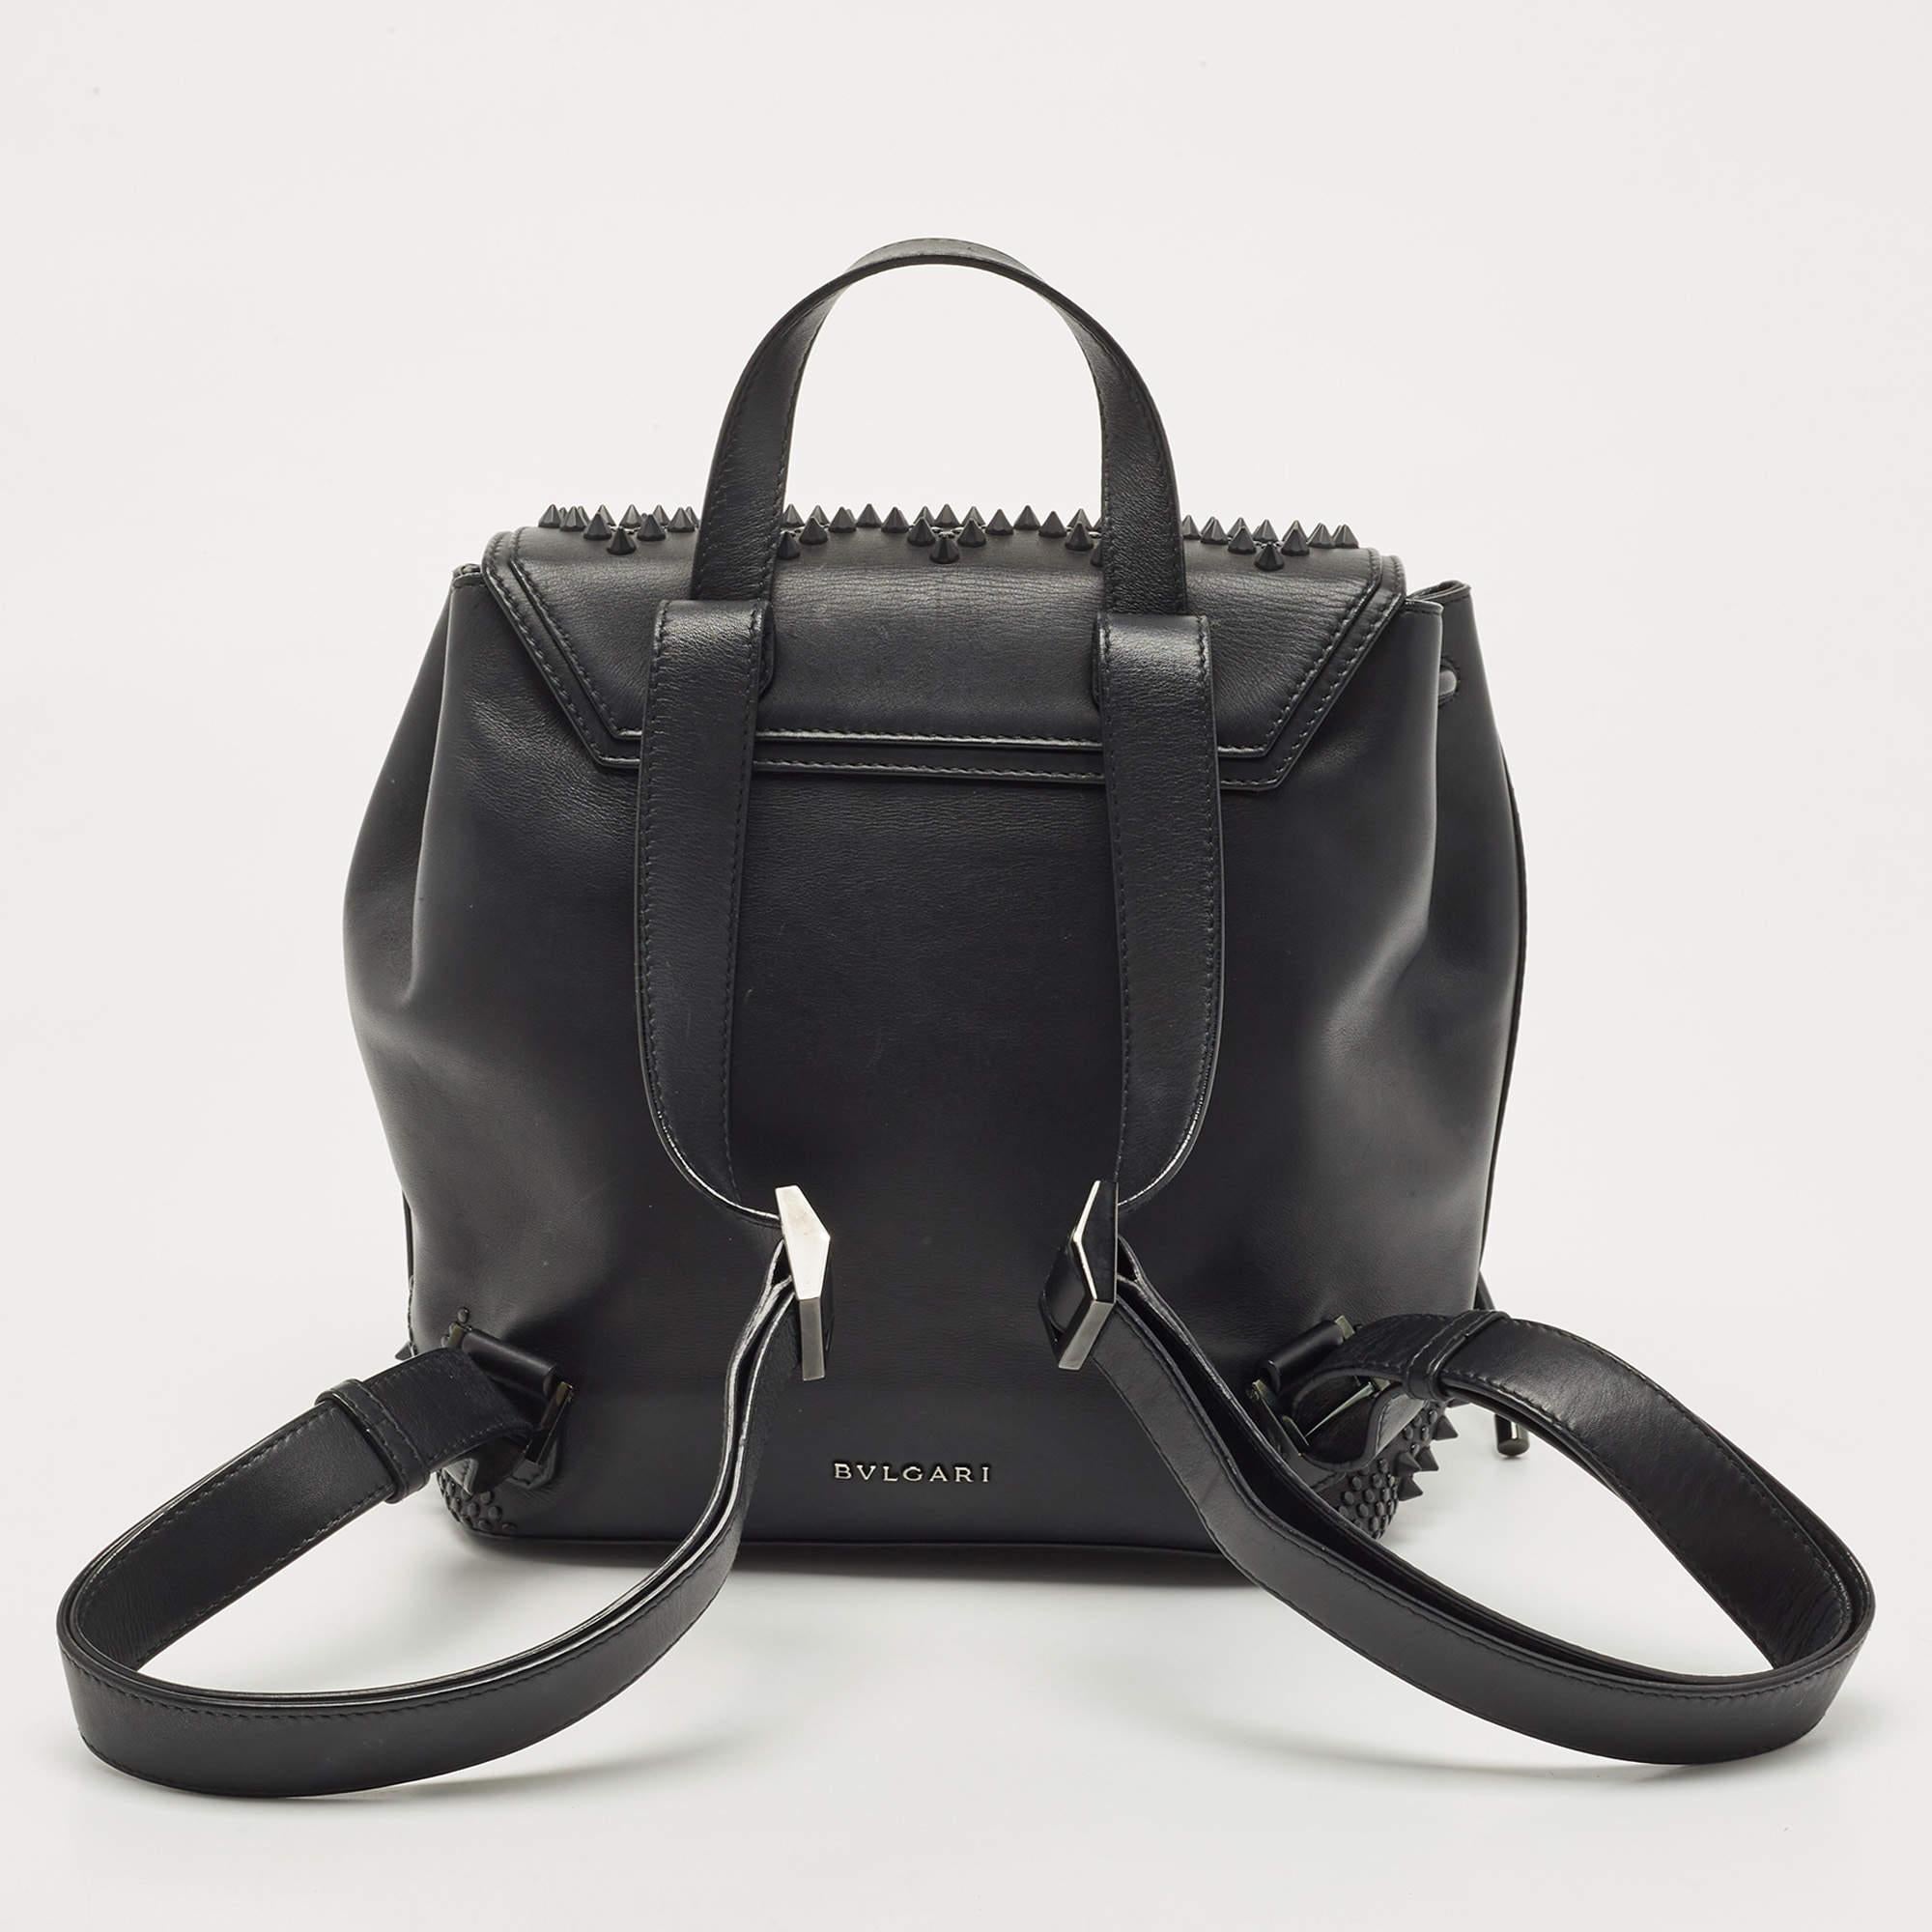 Bvlgari X Nicholas Kirkwood brings this black leather backpack. It is stylish, appealing, and highly practical. The backpack has beautiful embellishments all over, a top handle, two shoulder straps, and a front flap with the Serpenti head